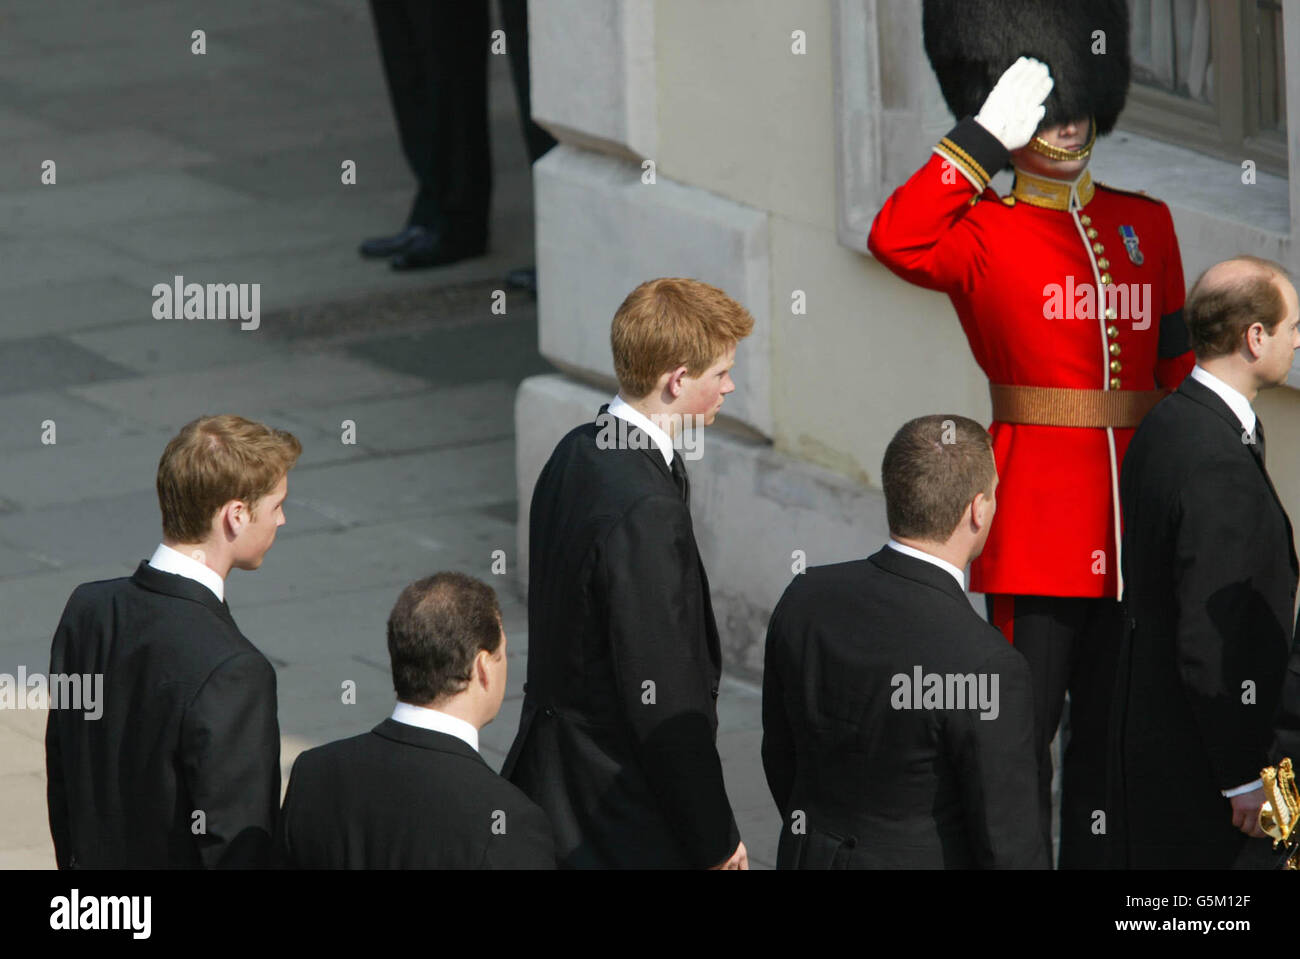 Grandsons and great-grandsons of the Queen Mother arrive before the start of ceremonial procession to the lying-in-state at Westminster Hall. L-R: Prince William, Viscount Linley, Prince Harry, Peter Phillips and the Earl of Wessex. * Thousands of mourners lined the route to pay their last respects to Queen Elizabeth, the Queen Mother who died last Saturday aged 101. Stock Photo